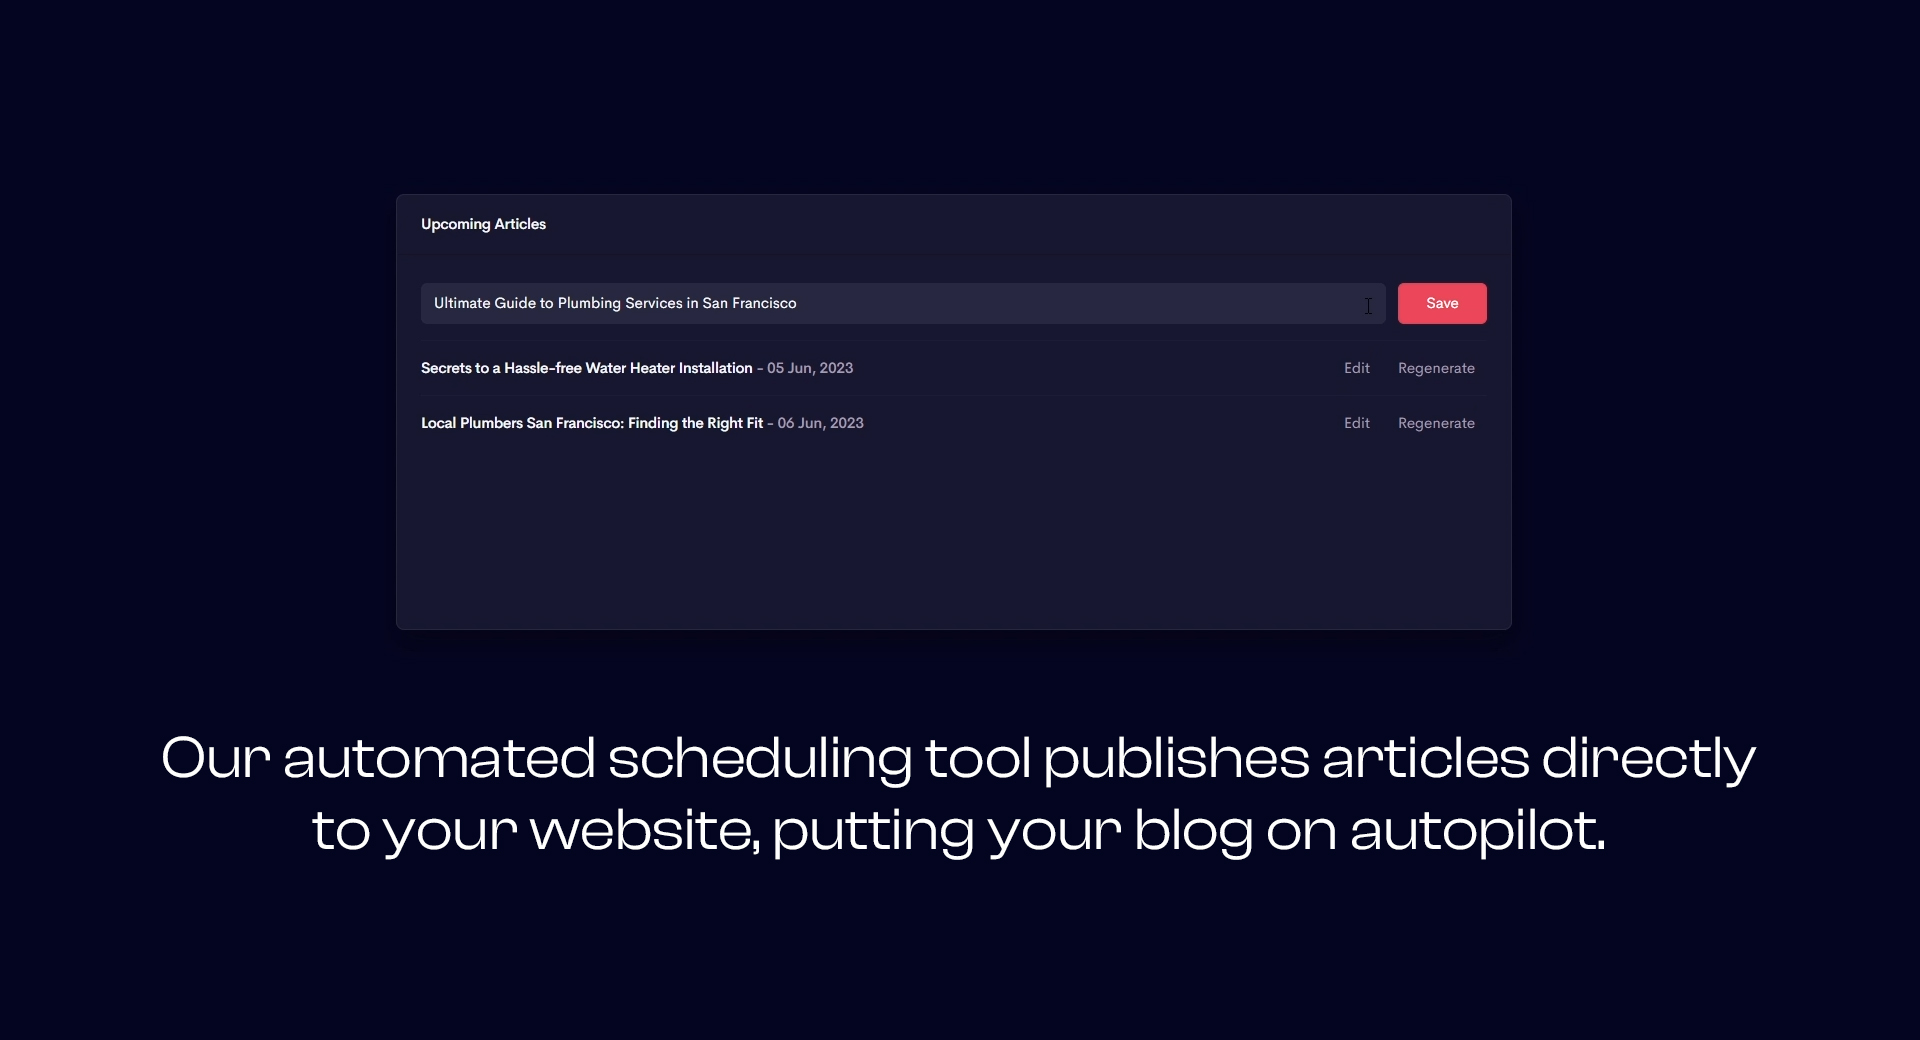 Our automated scheduling tool publishes articles directly to your website, putting your blog on autopilot.